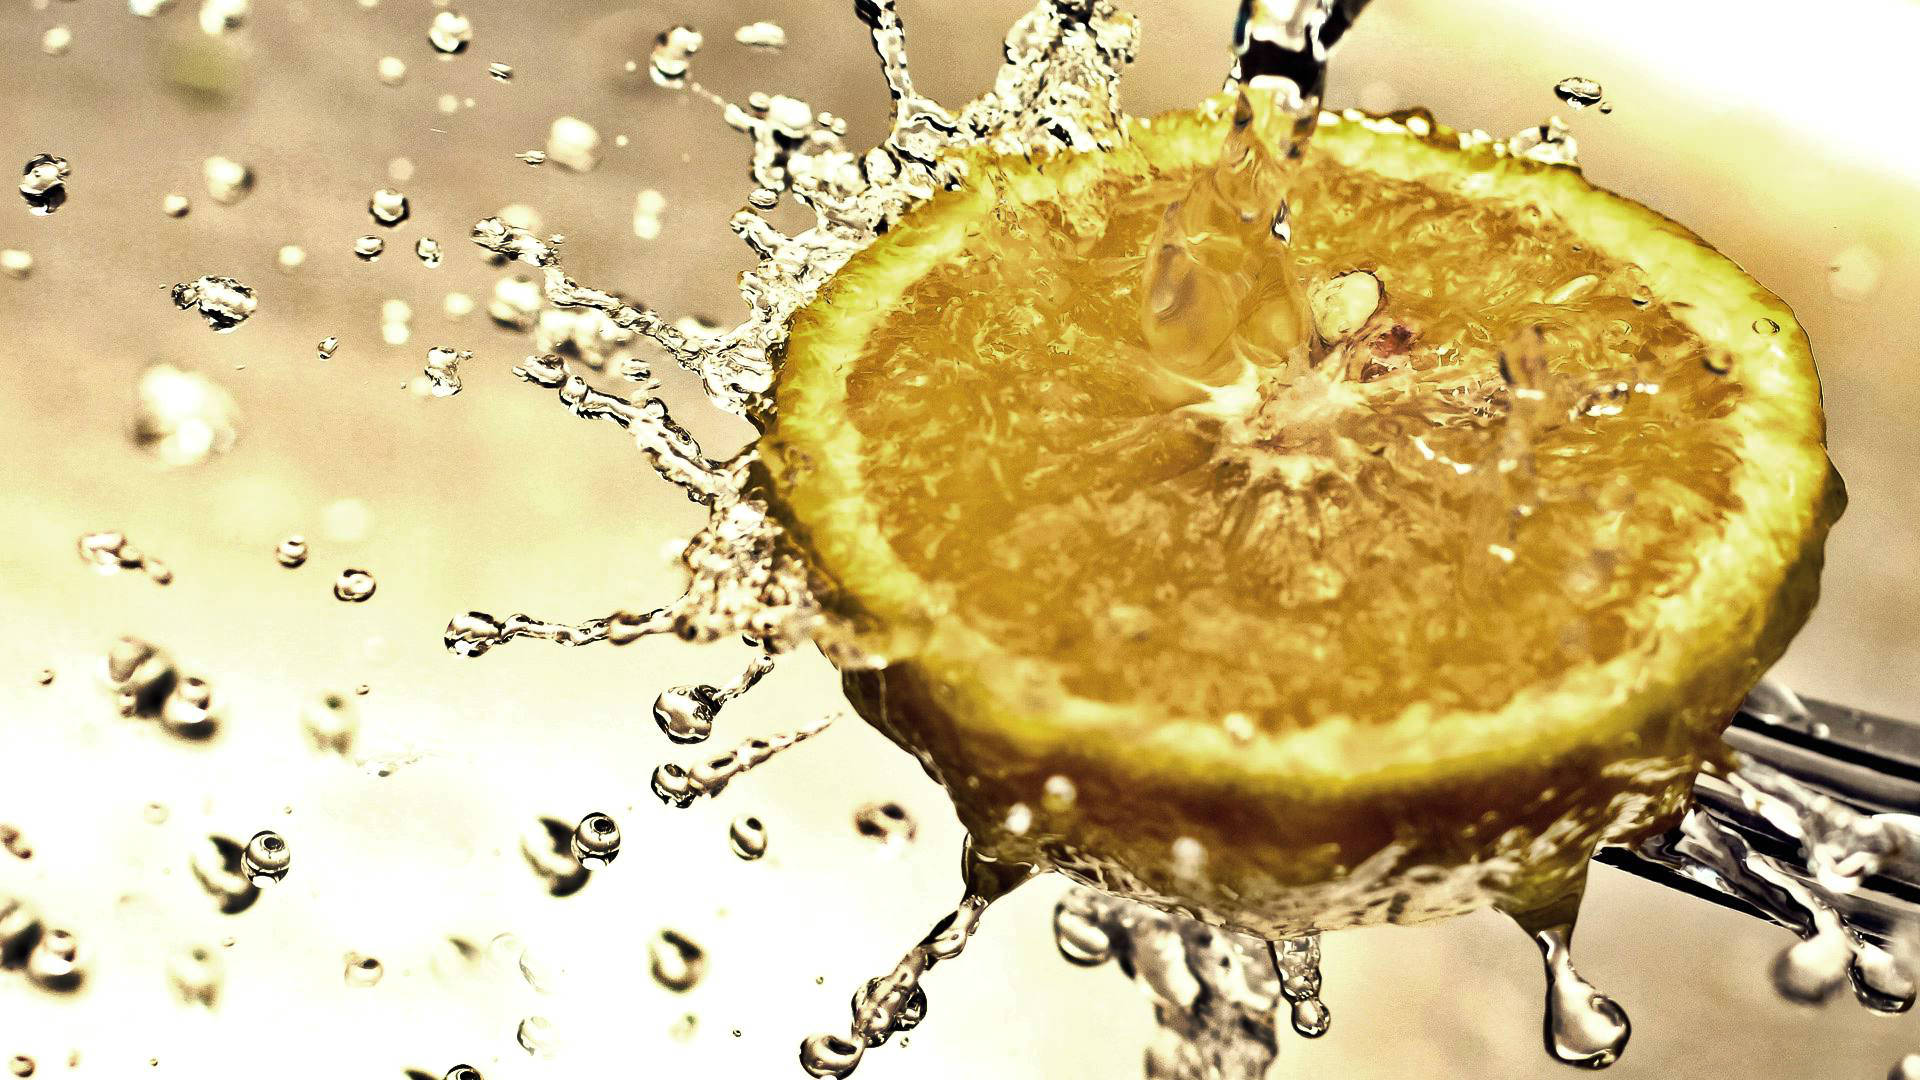 Combination of Lemon Water and The World's Healthiest 